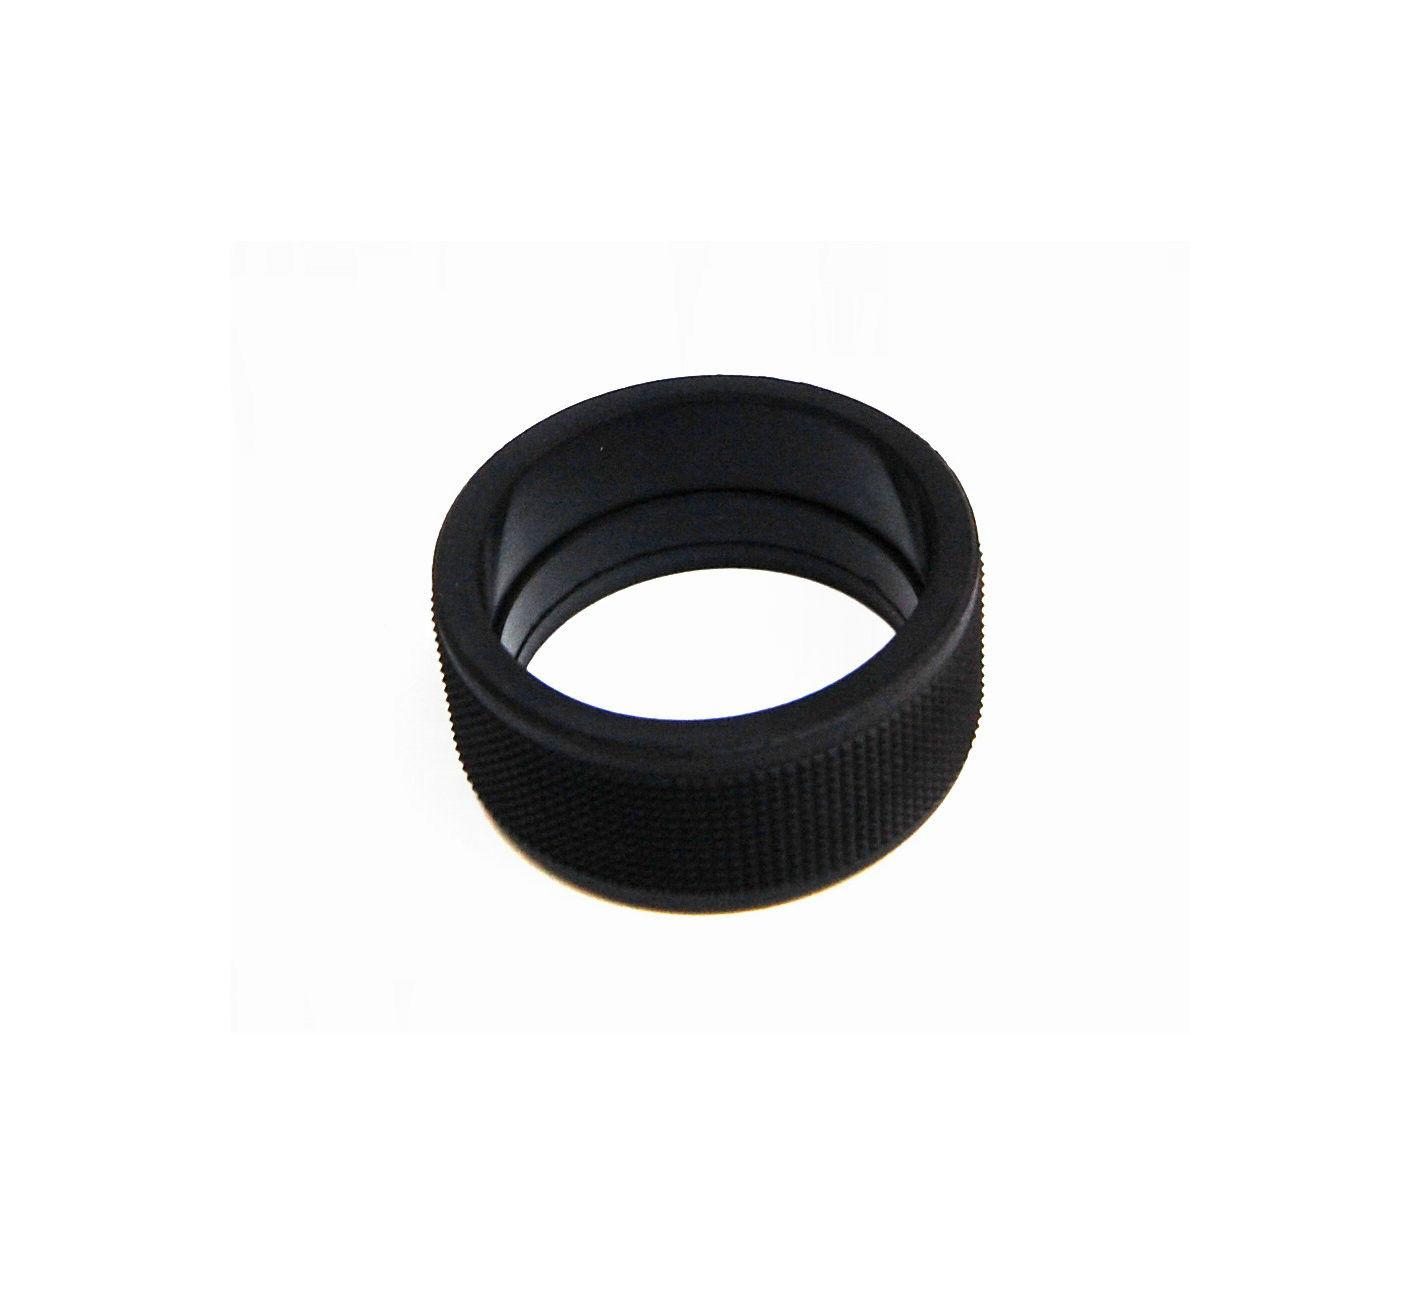 Yaesu Rubber Ring for Main Dial Knob for FT-897 FT-897D FT897